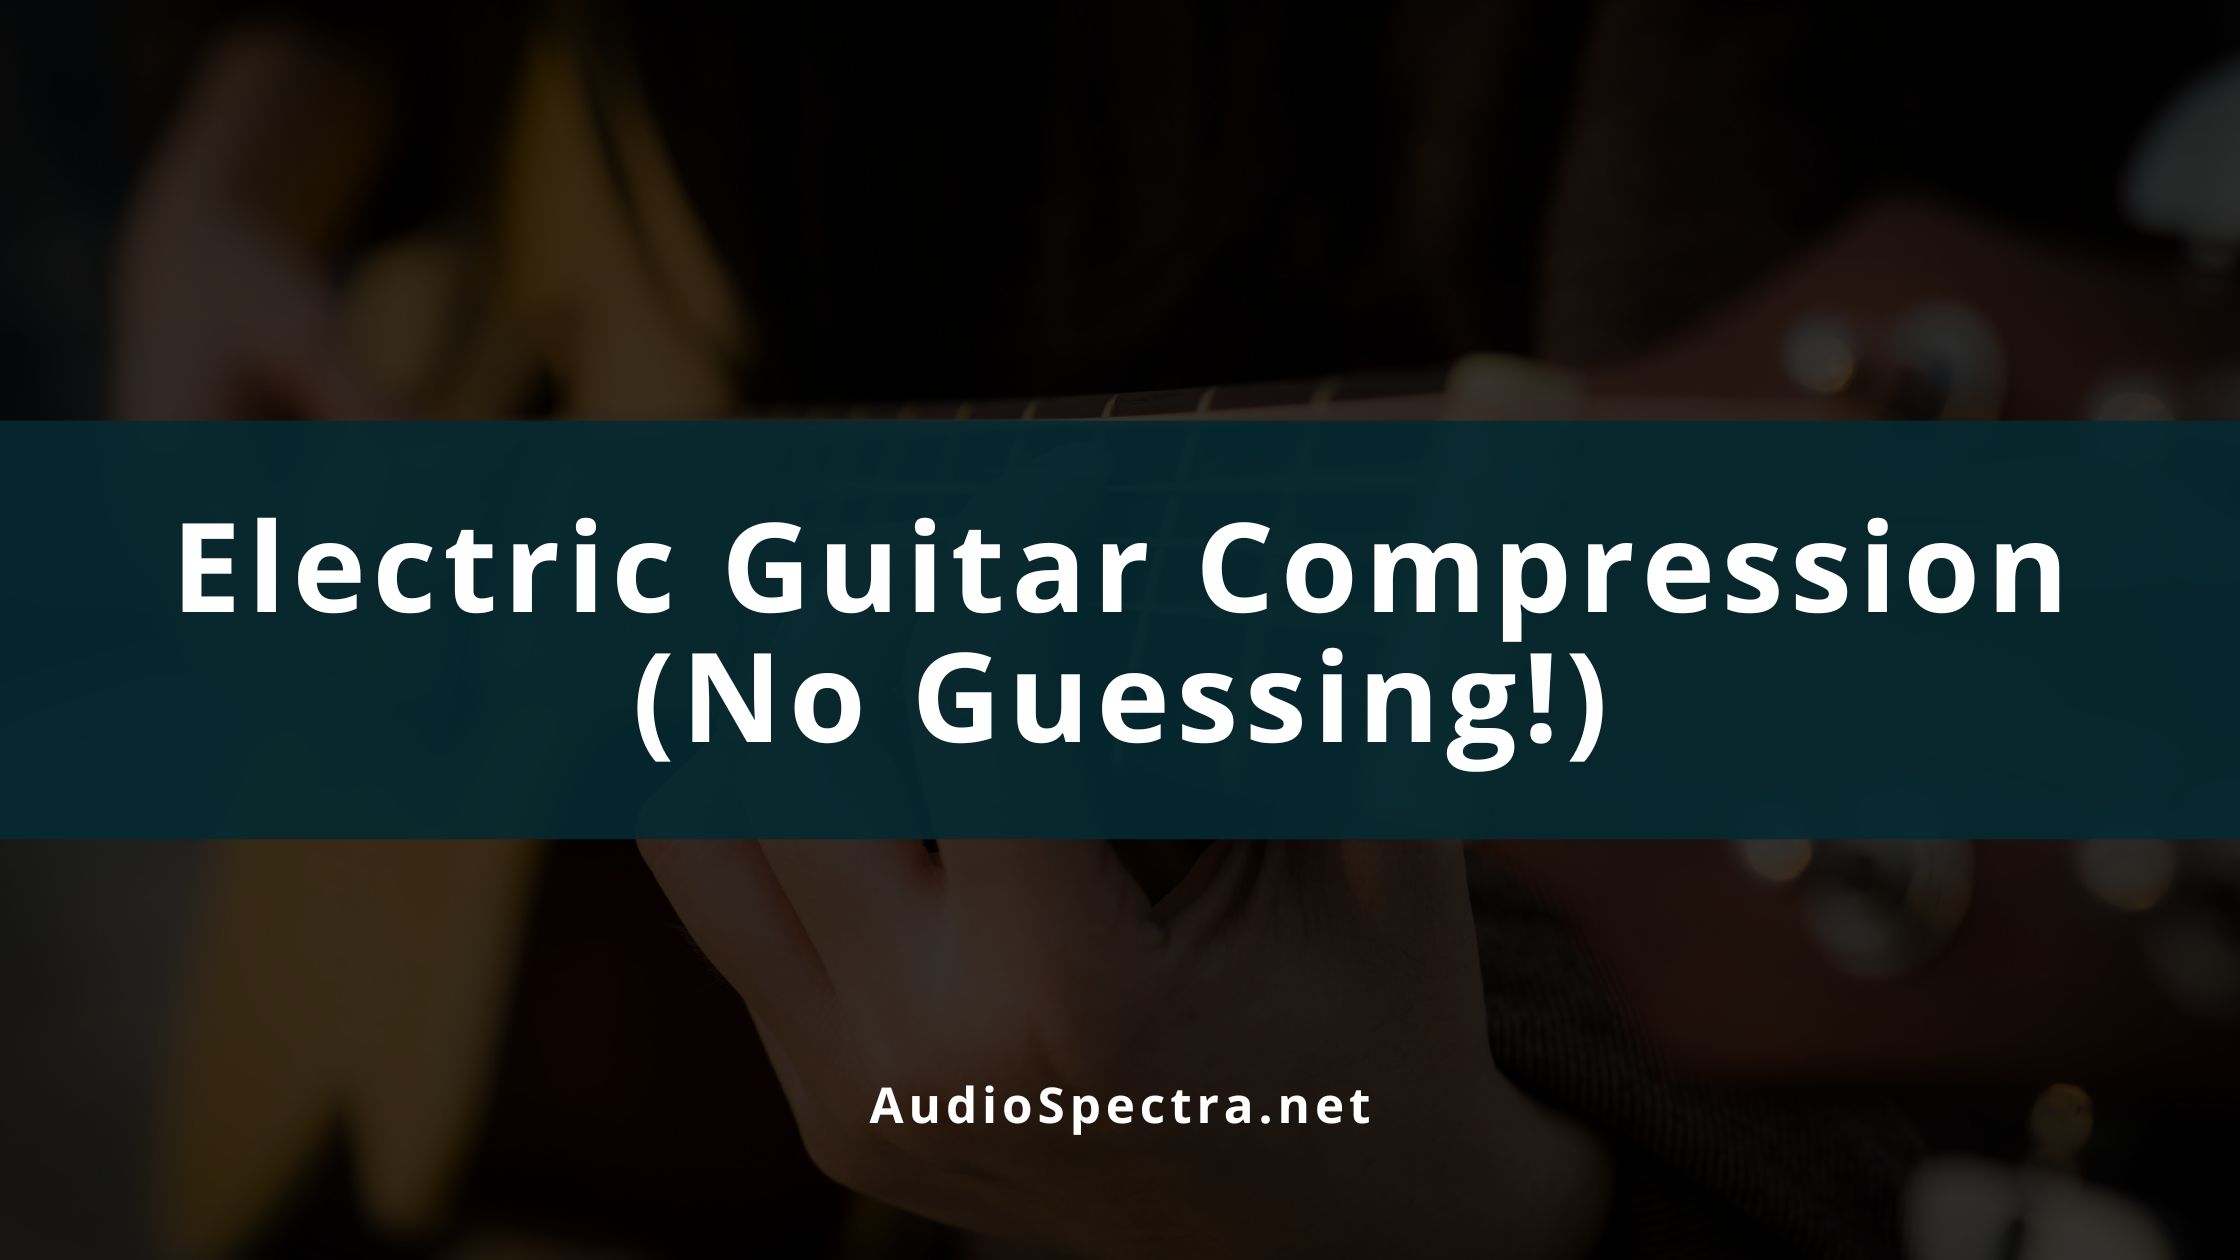 How To Compress an Electric Guitar (No Guessing!)